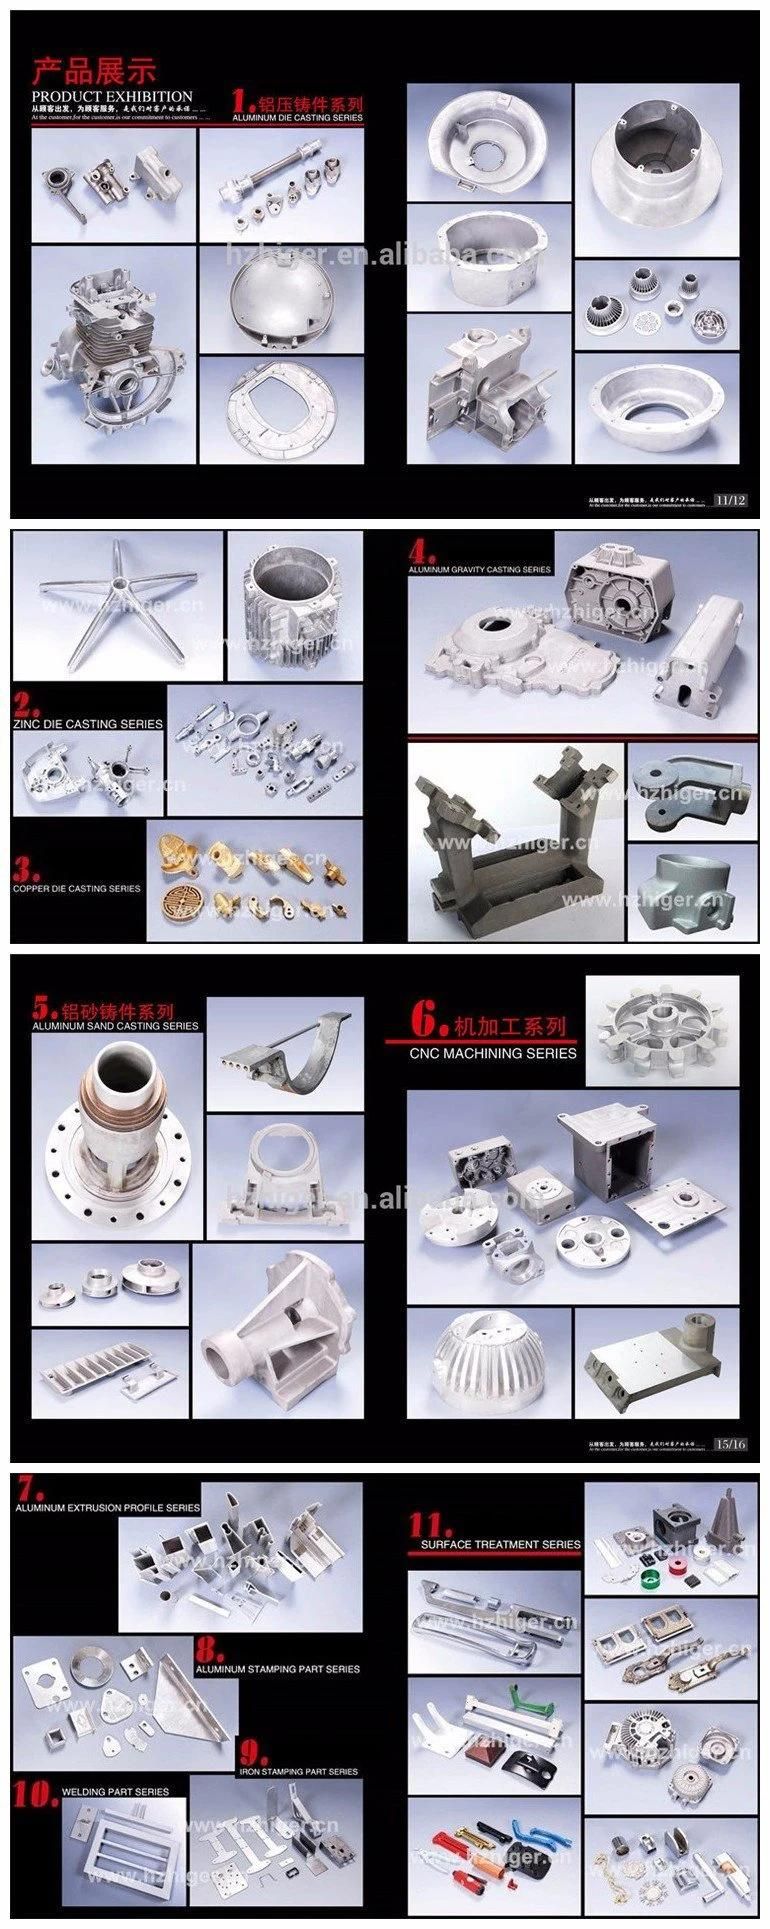 Customized High Quality Aluminum Industrial Parts